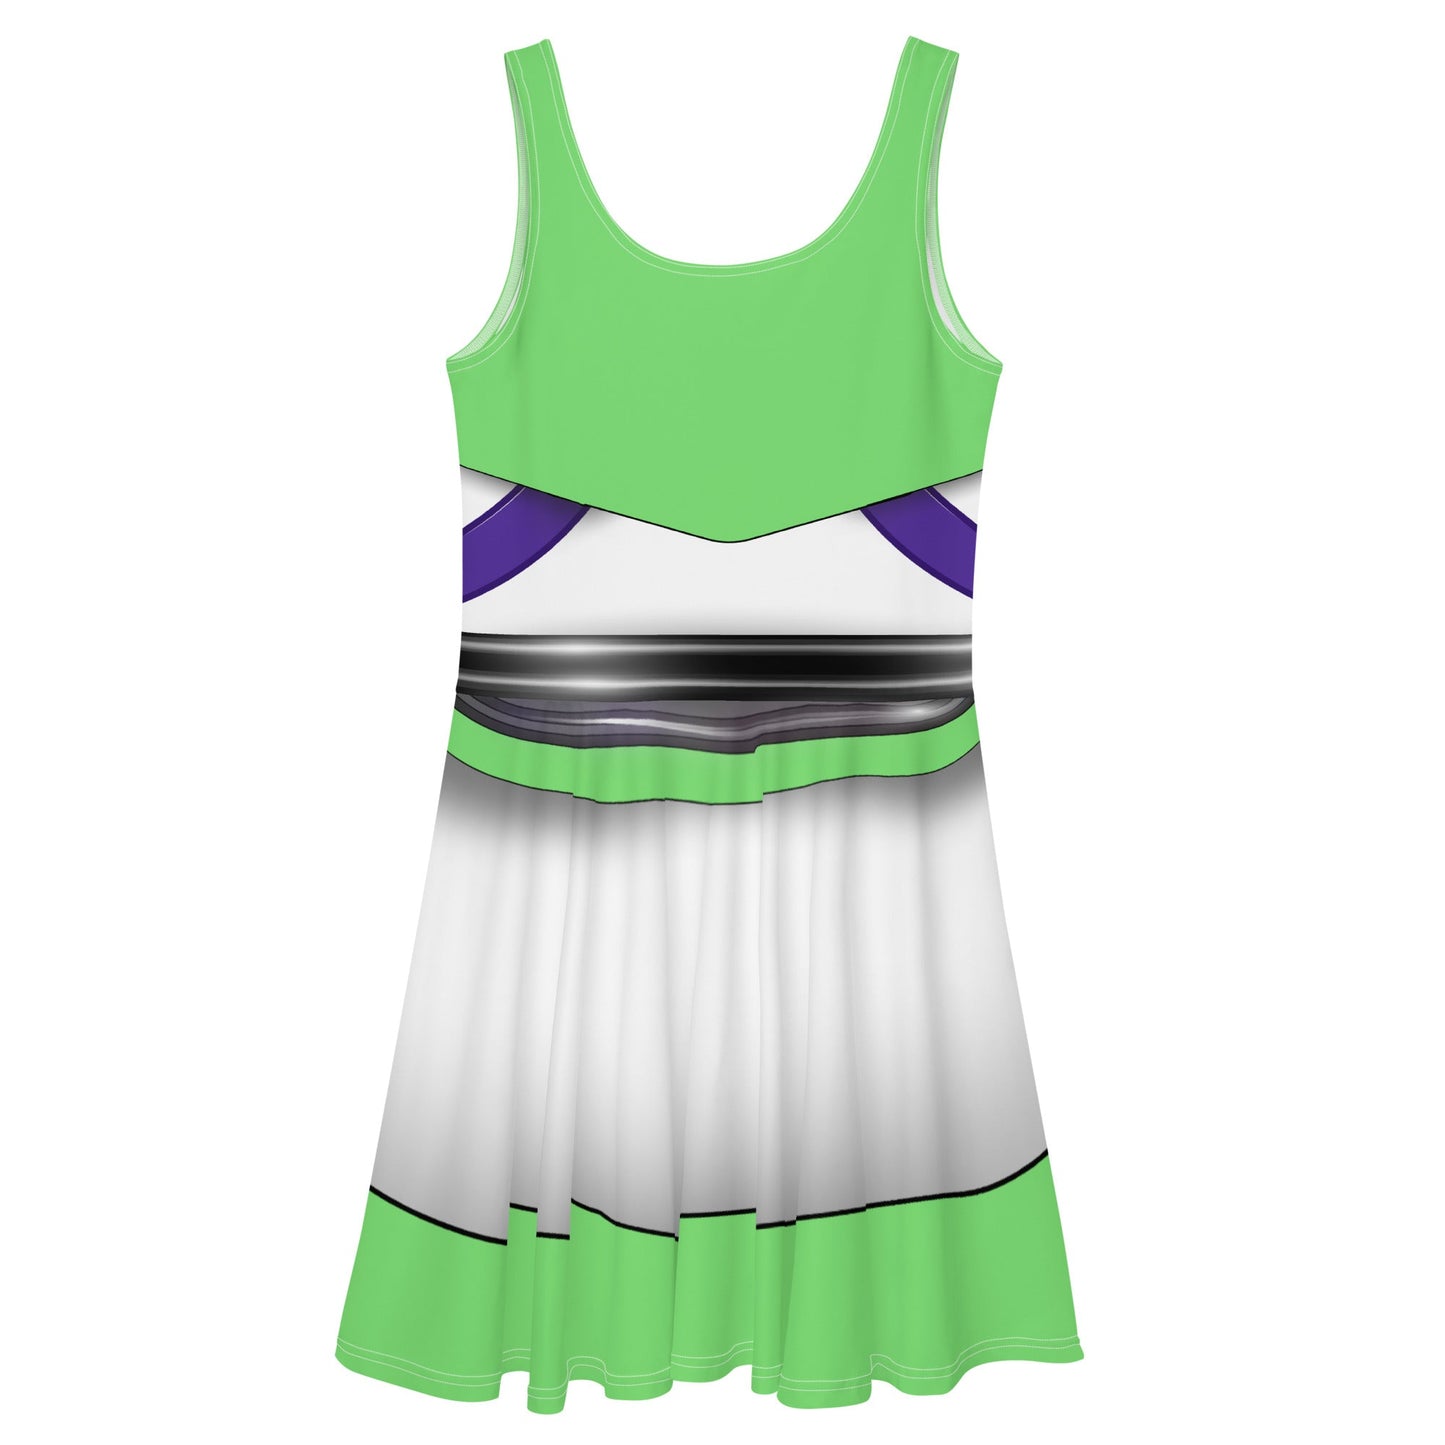 The Buzz Skater Dress- Cosplay, Bounding, Running Costume adult disneybuzz dressbuzz lightyear#tag4##tag5##tag6#